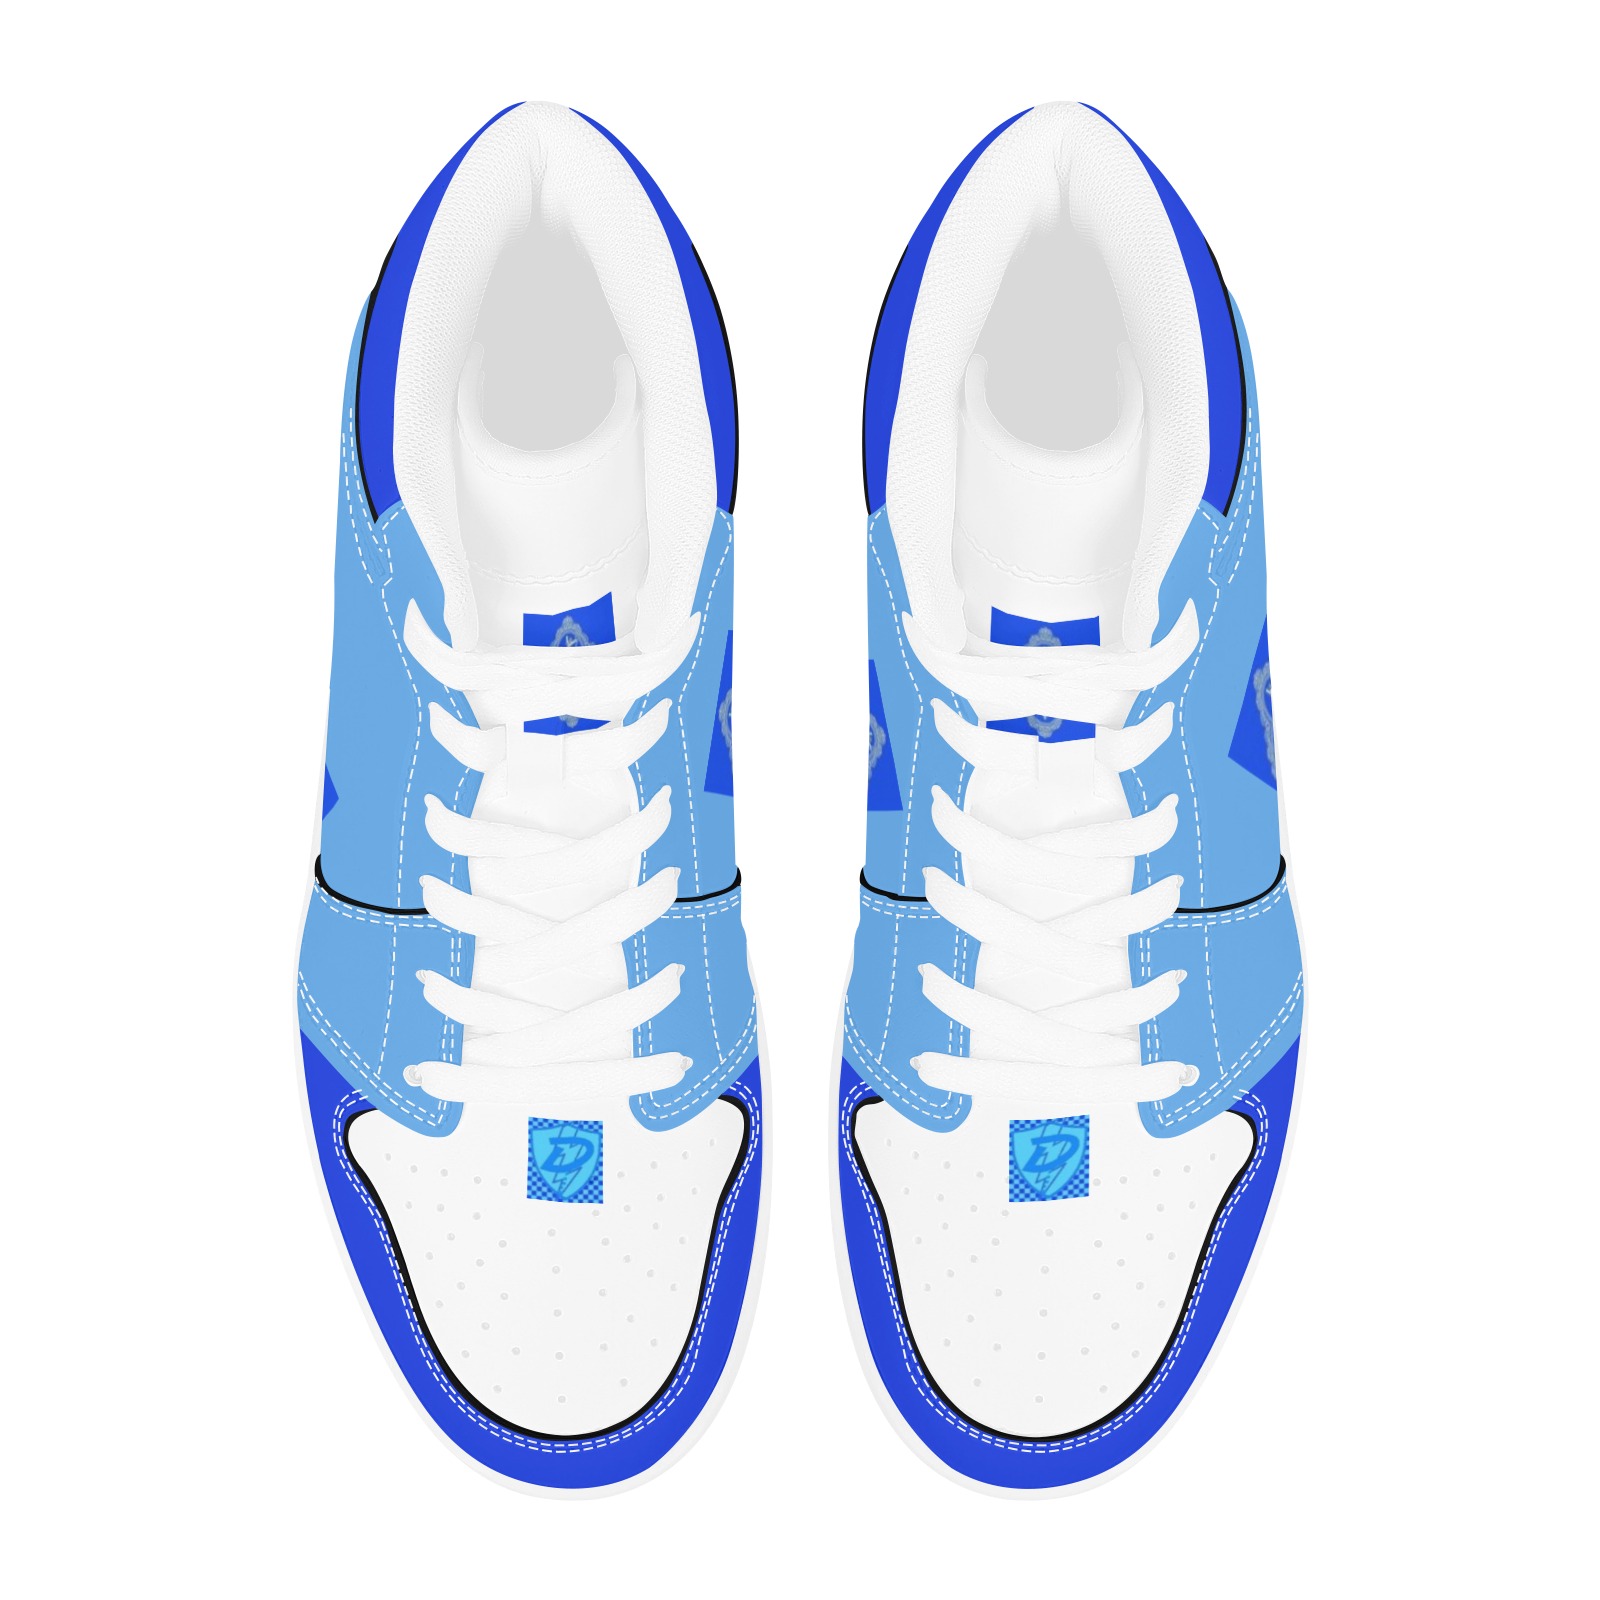 DIONIO - Carolina Bluez Basketball Sneakers Unisex High Top Sneakers (Model 20042)